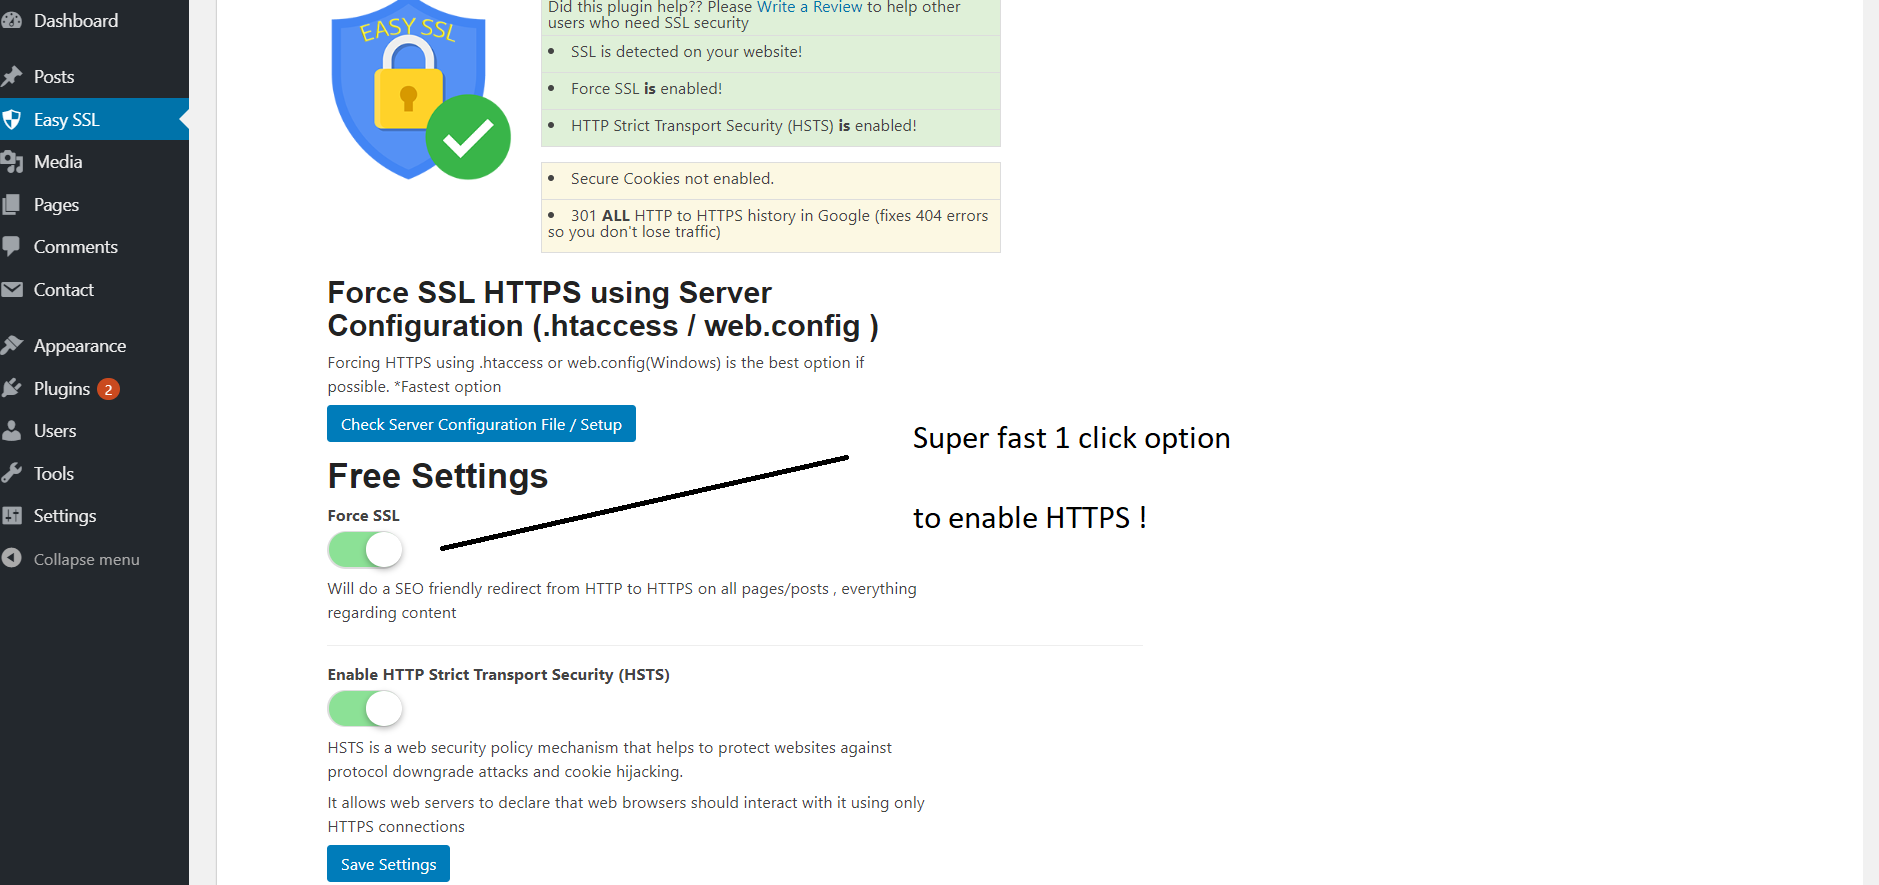 Enable HTTPS SSL and HSTS